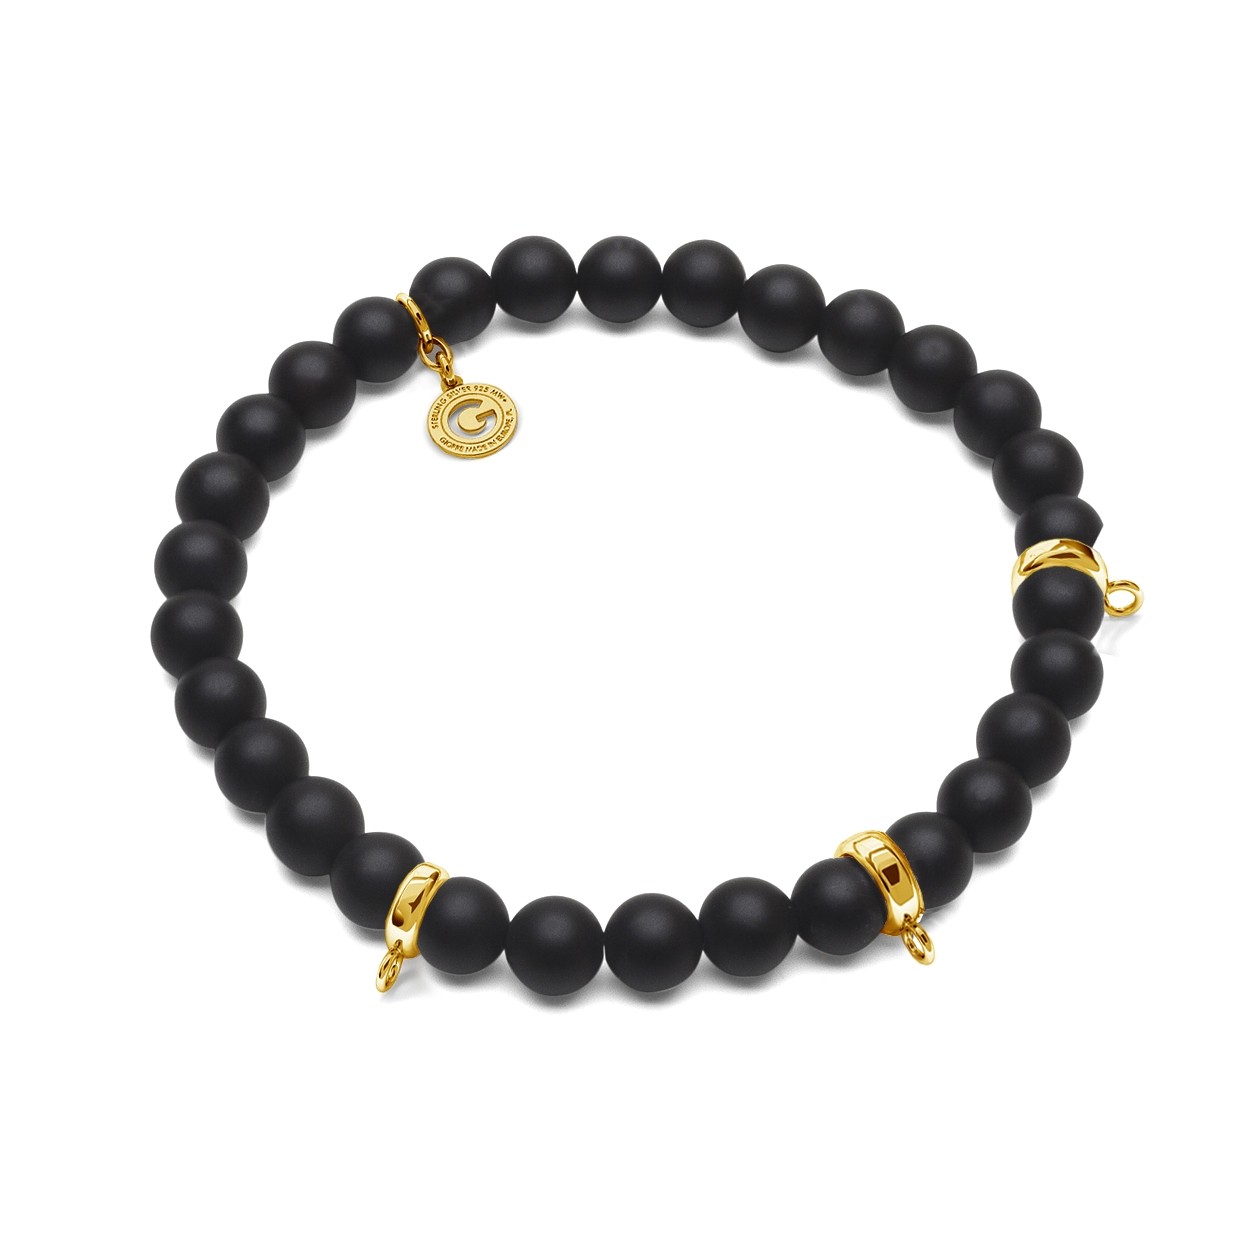 STONES ONYX, FLEXIBLE BRACELET FOR 3 CHARMS, WITH NATURAL STONES